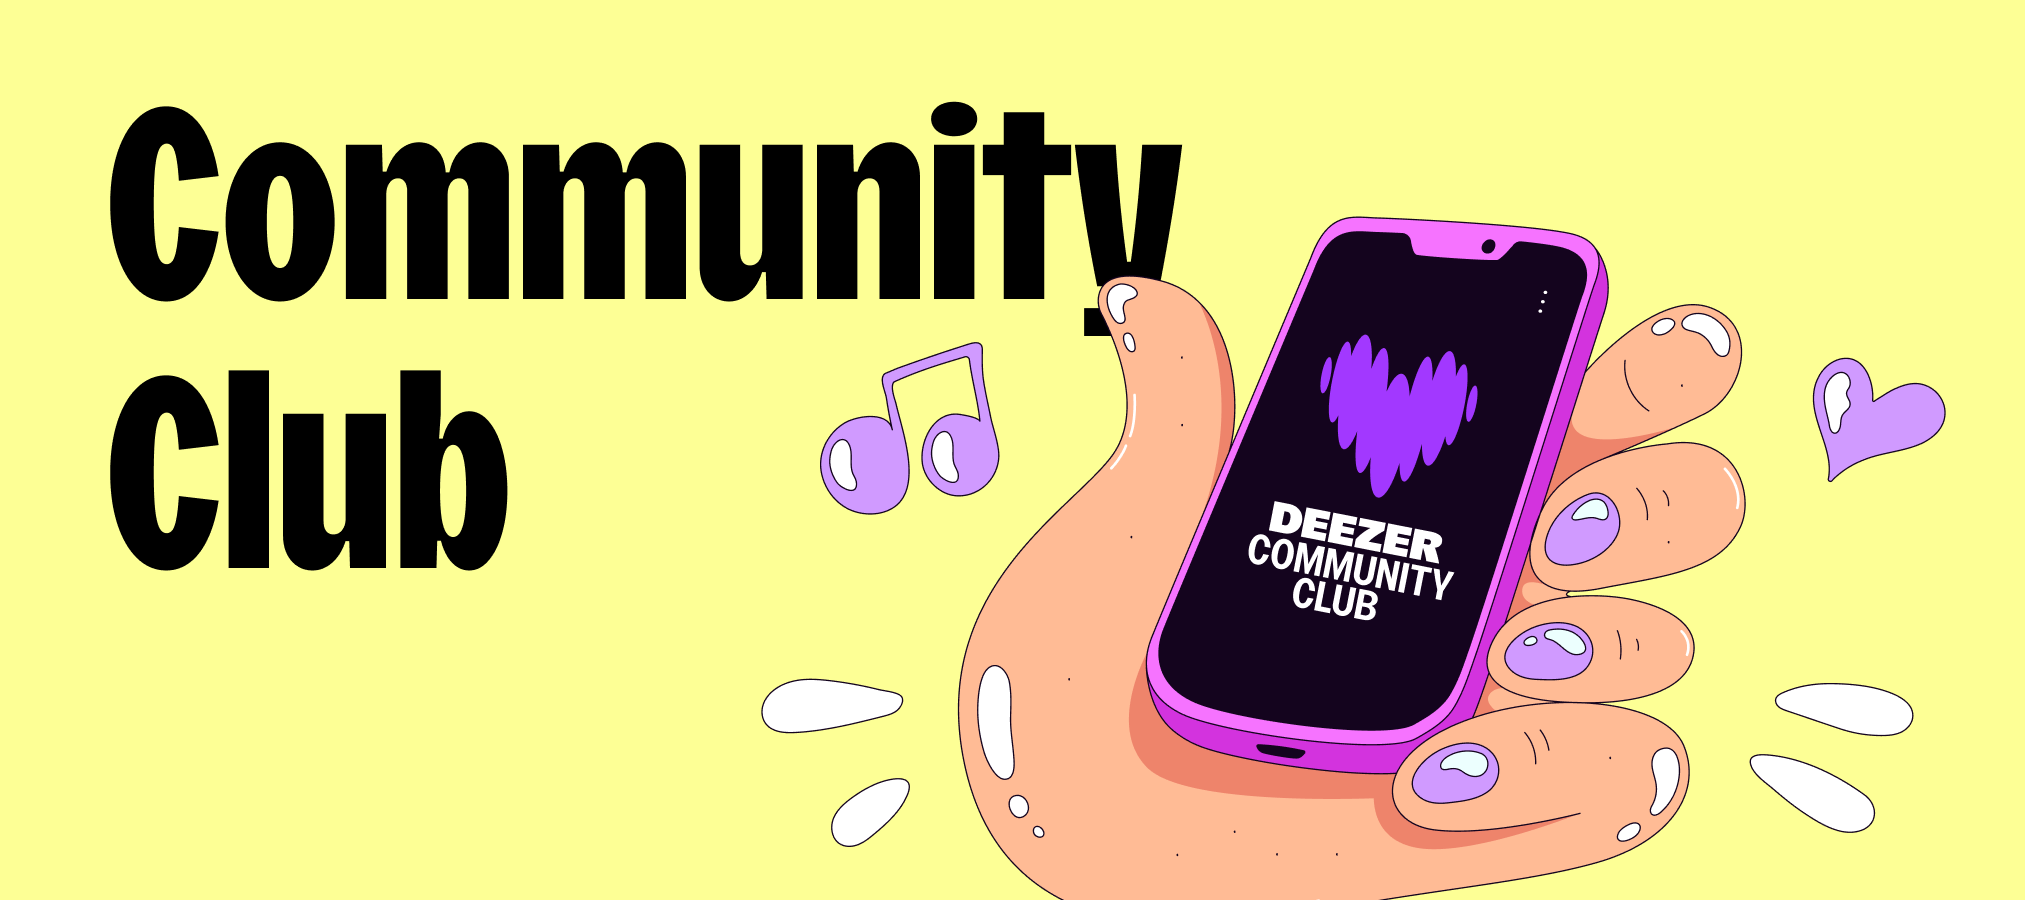 Community Club: participate in the community and win a free subscription